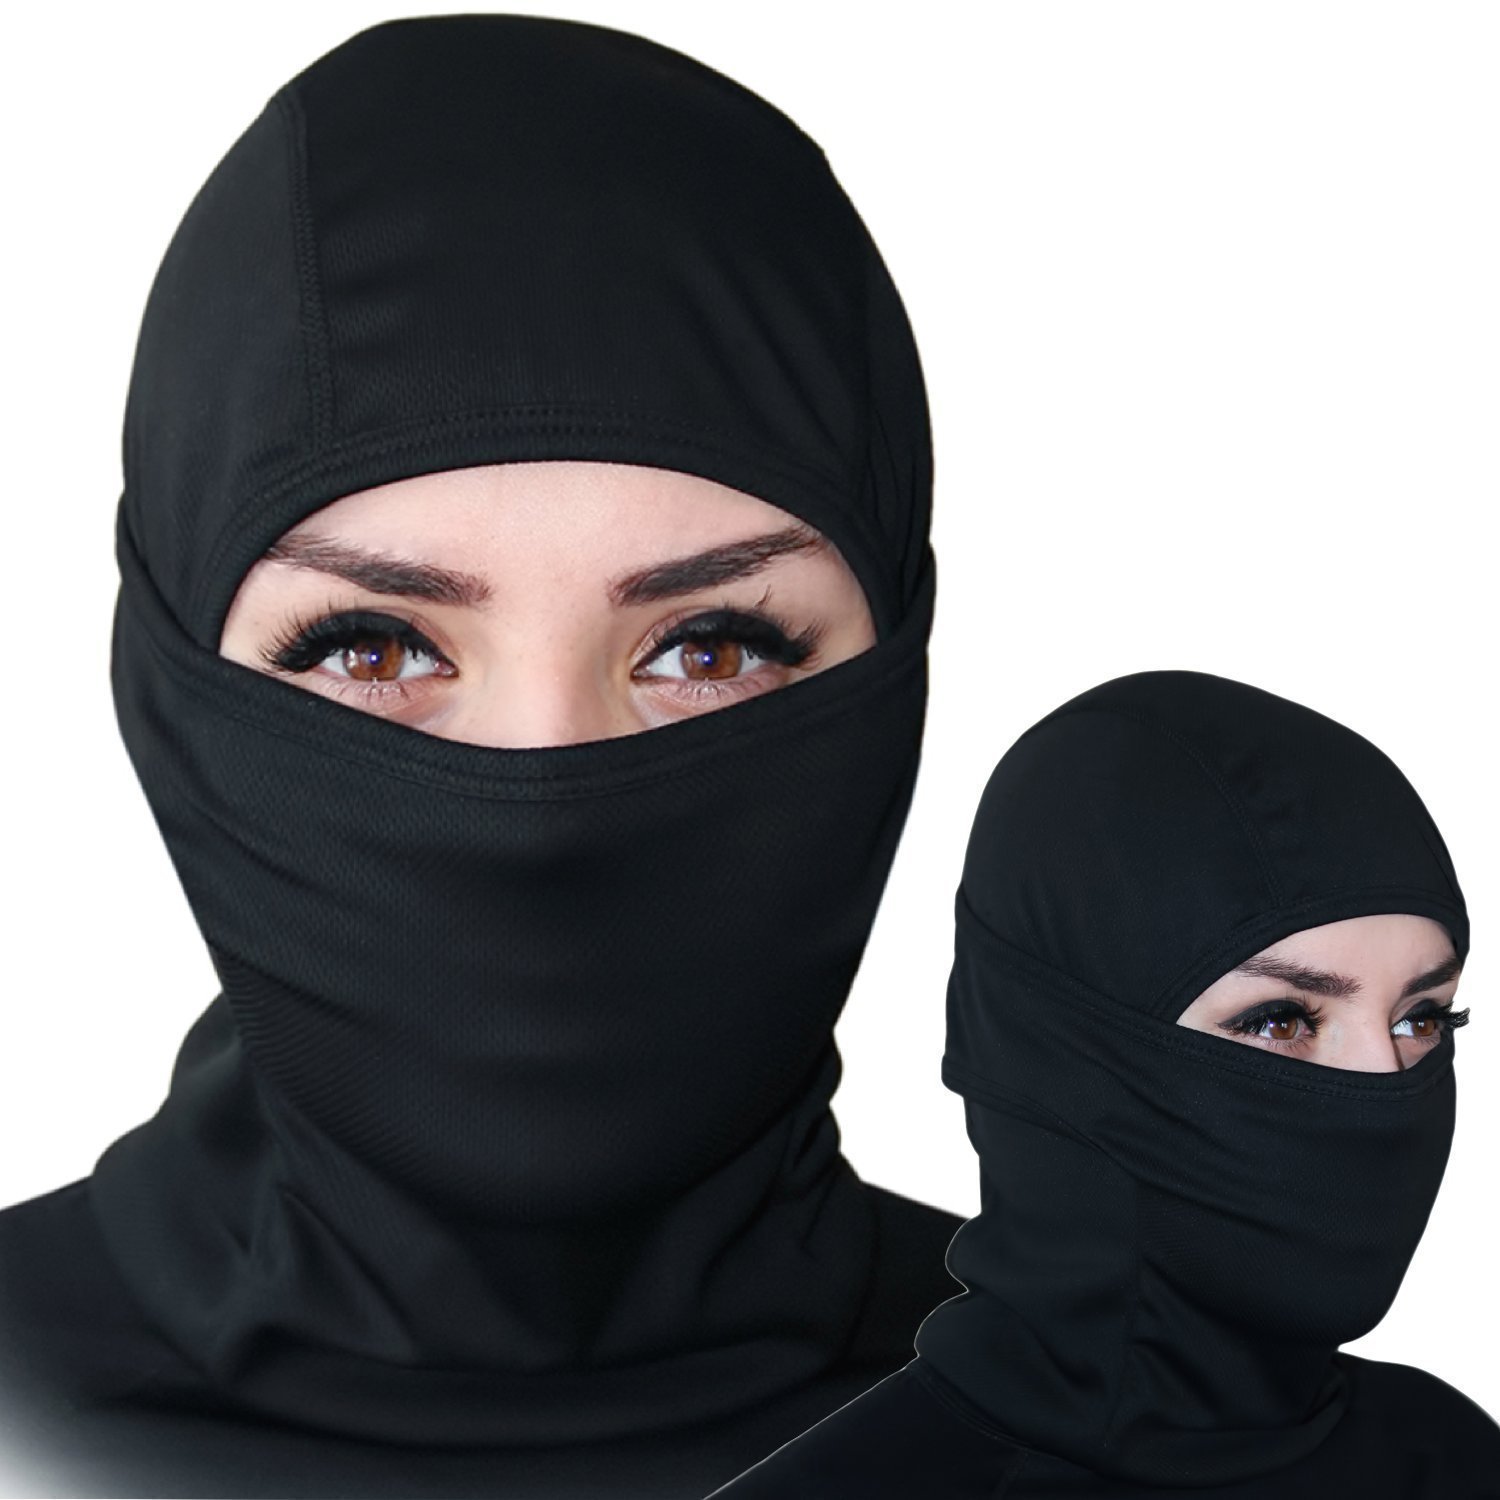 Ultimate-Thermal-Retention-Windproof-Ski-Tactical-Mask-Cold-Weather-Face-Mask-Neck-Warmer-1241597-2